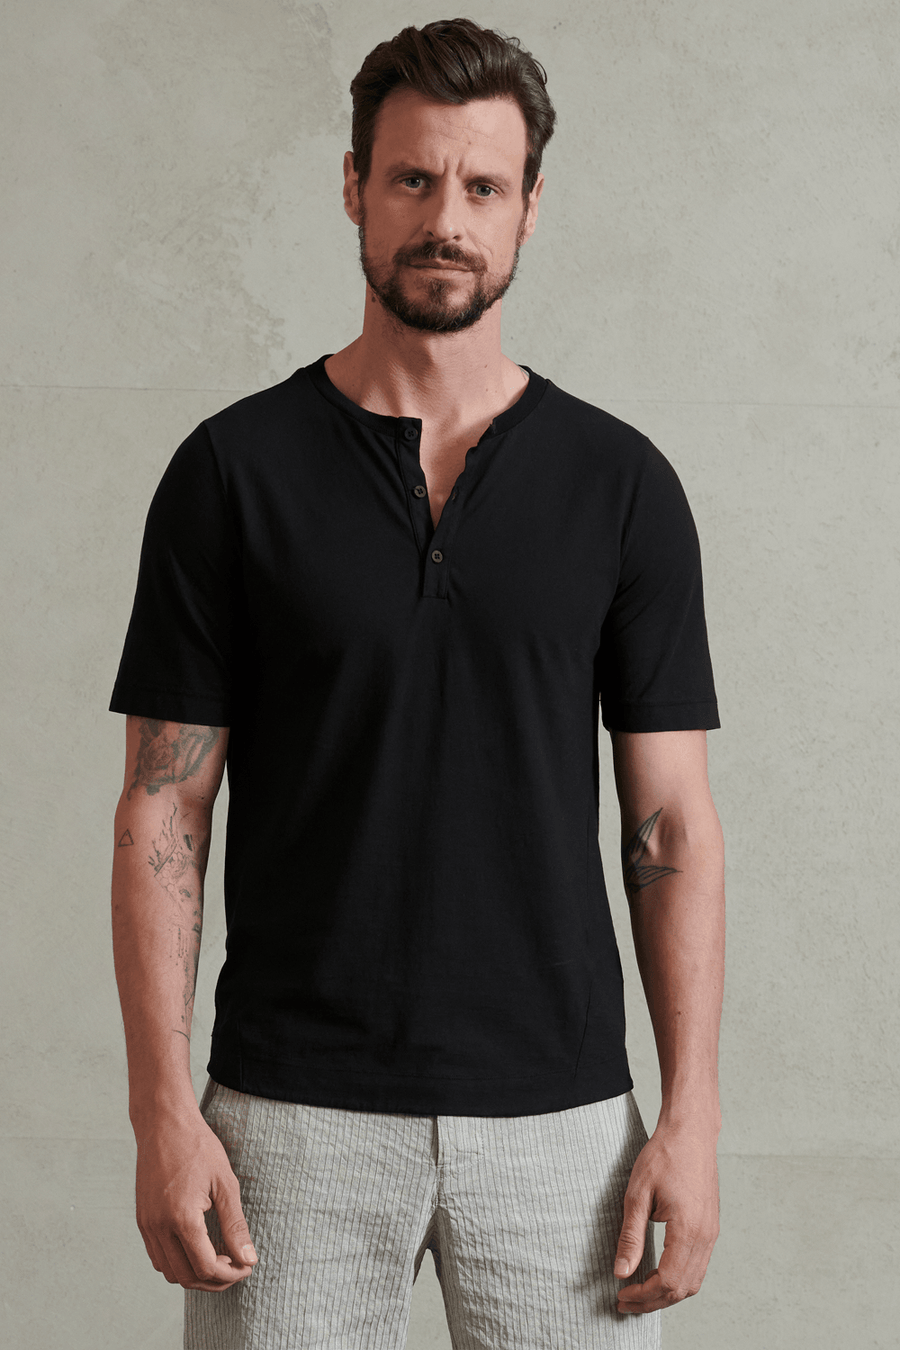 Buy the Transit Button Up Cotton T-Shirt in Black at Intro. Spend £50 for free UK delivery. Official stockists. We ship worldwide.